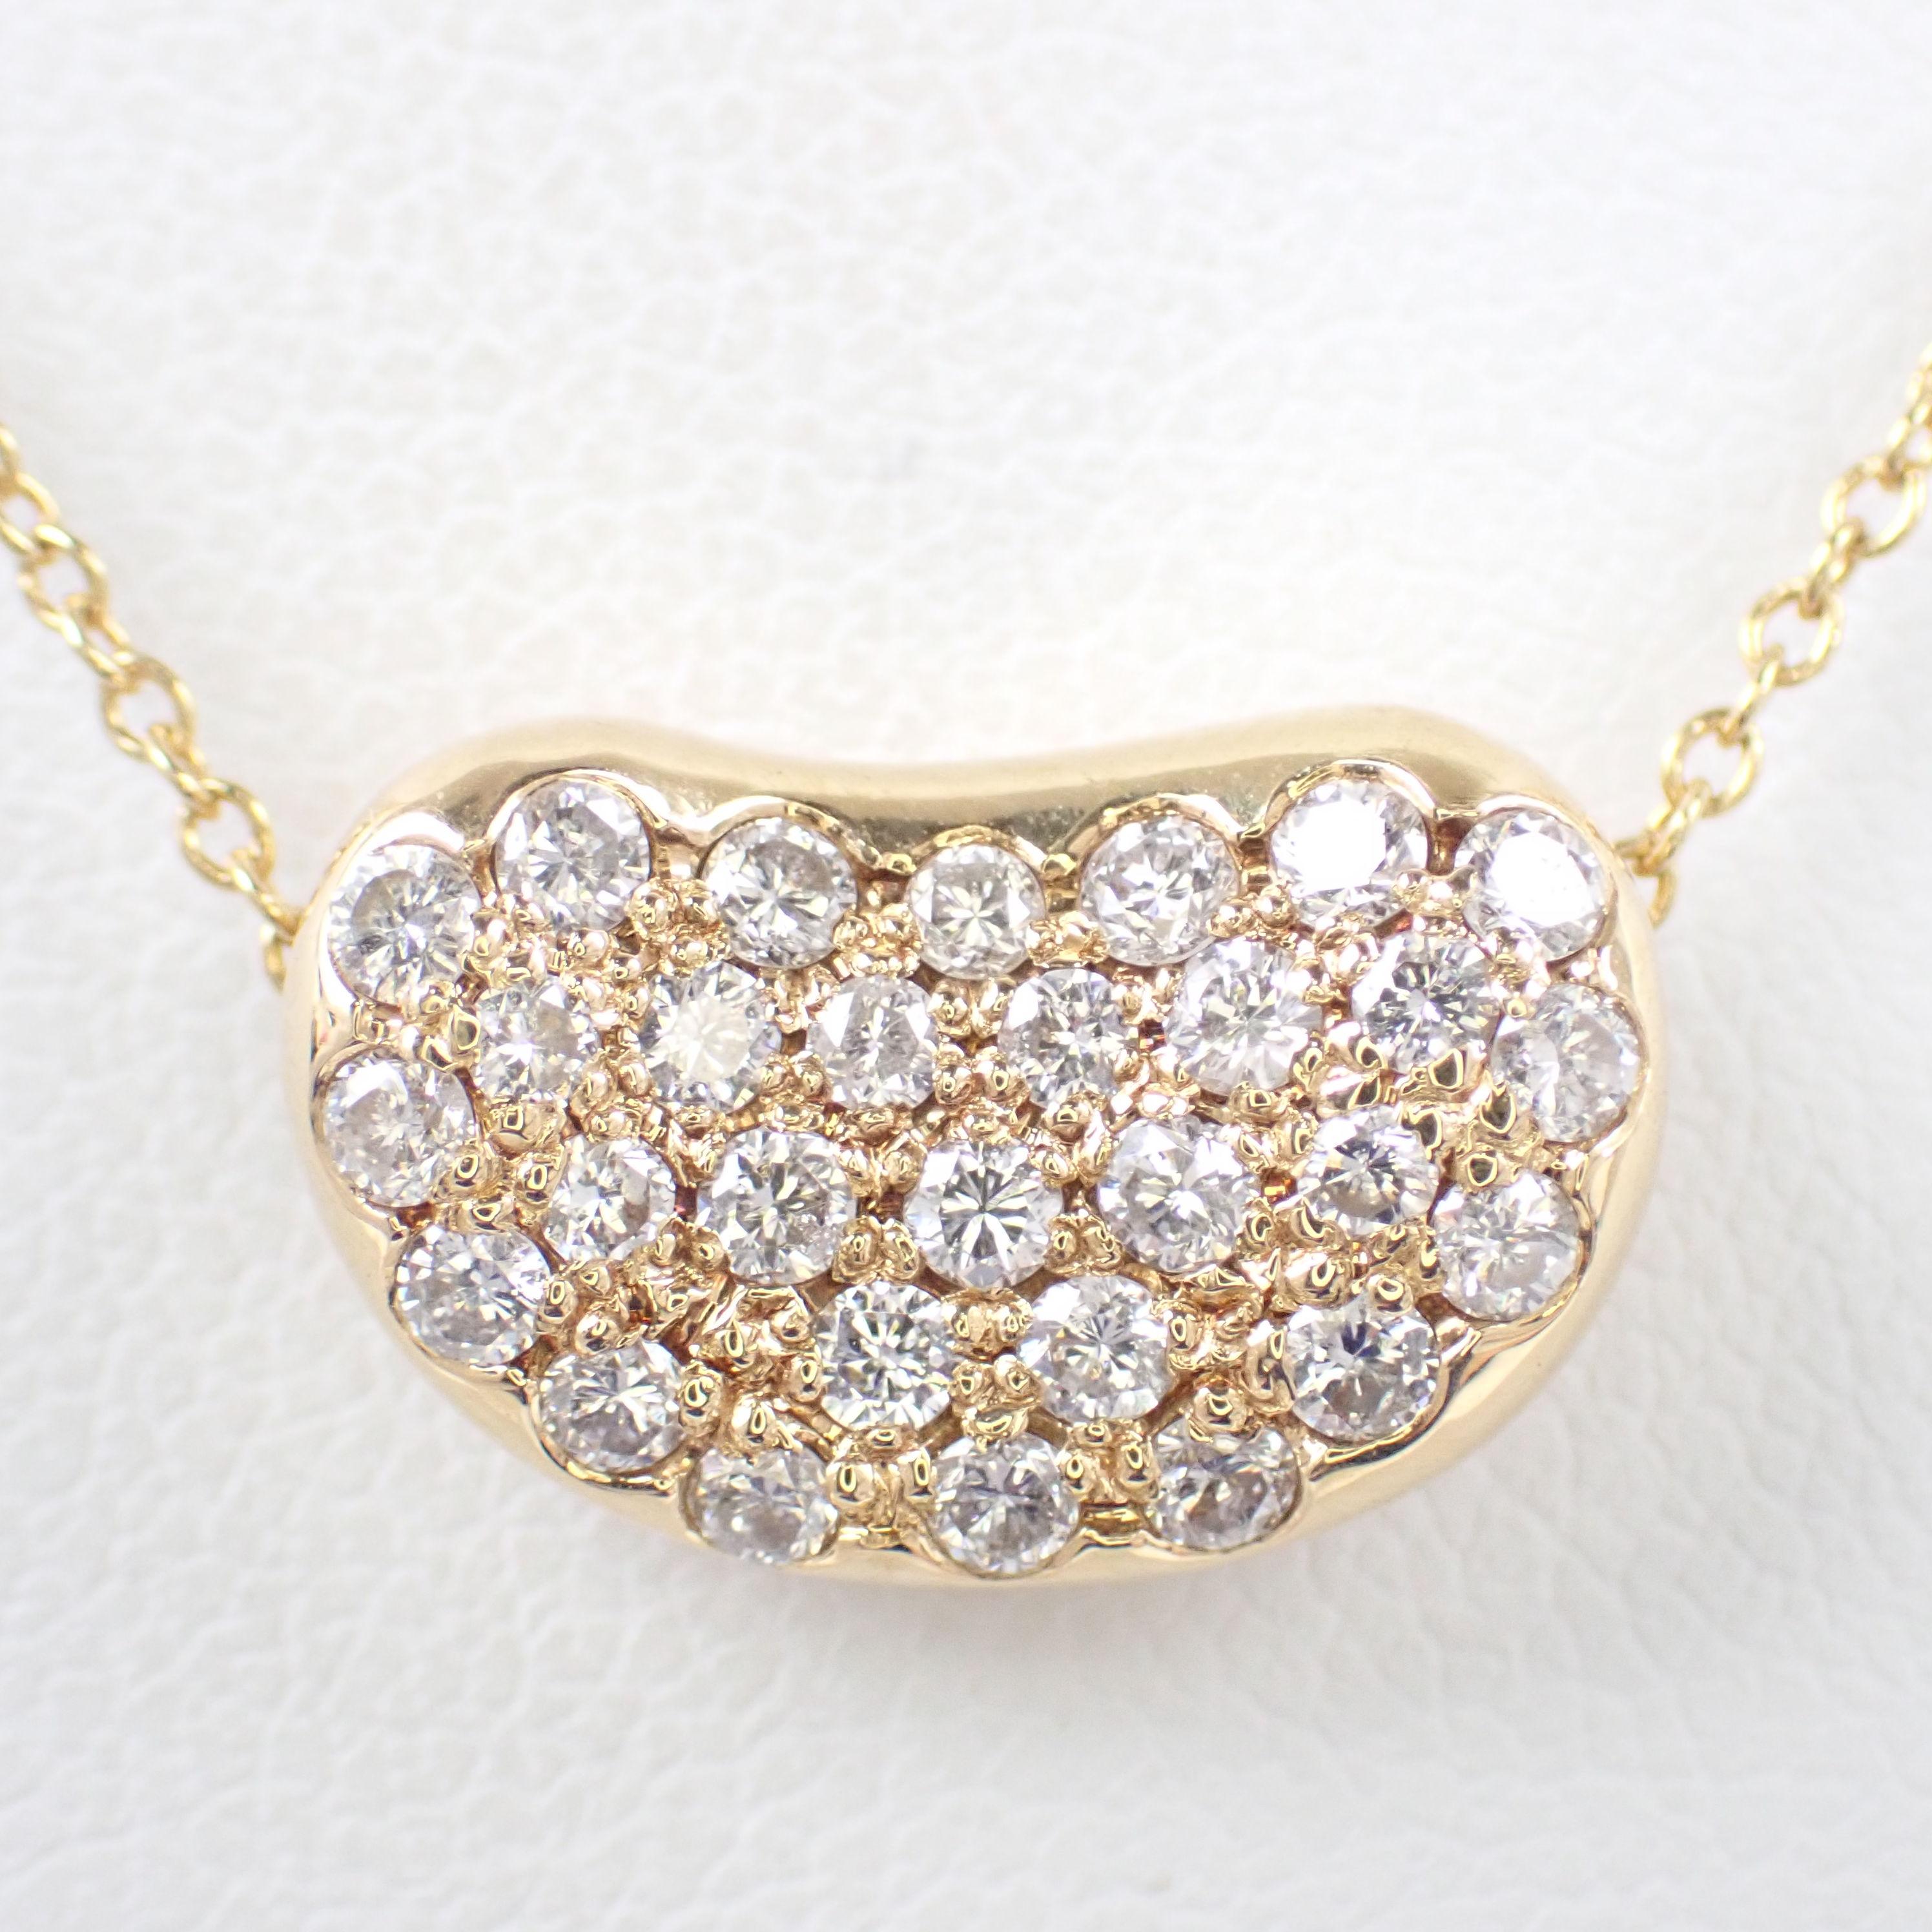 Brand : Cartier 
Description: Bean Diamond Necklace 
Metal Type:  750PG/ Yellow Gold
Total Weight:  6.6g
Width:  16 in (406.4 mm)
Condition: Preowned; small signs of wearing
Box -   Not Included
Papers -  Not Included
